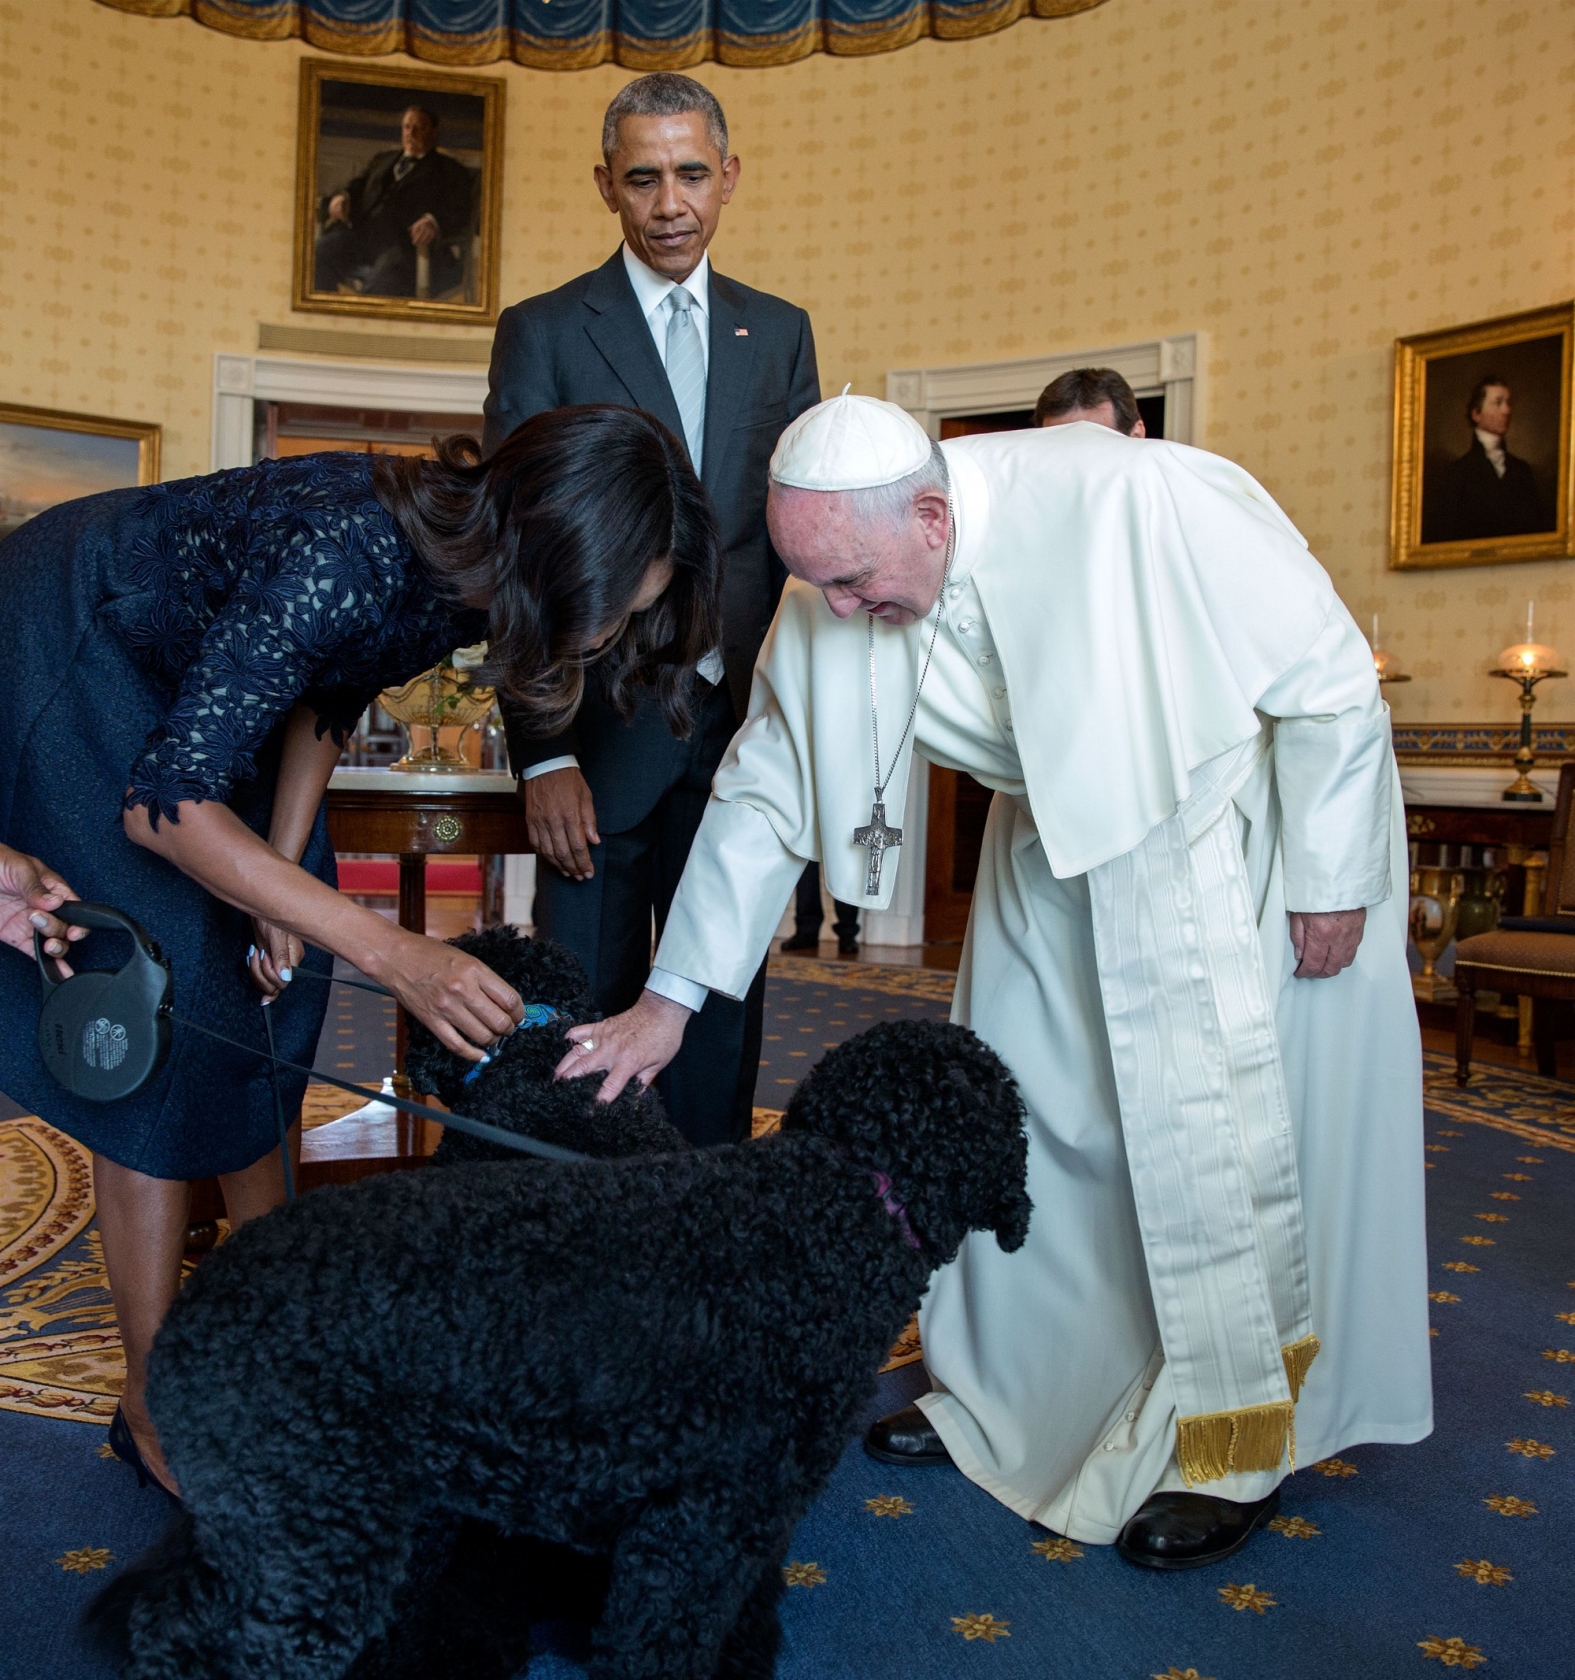 The First Lady introduces Pope Francis to their family pets Bo and Sunny following the ceremony. (Official White House Photo by Pete Souza)